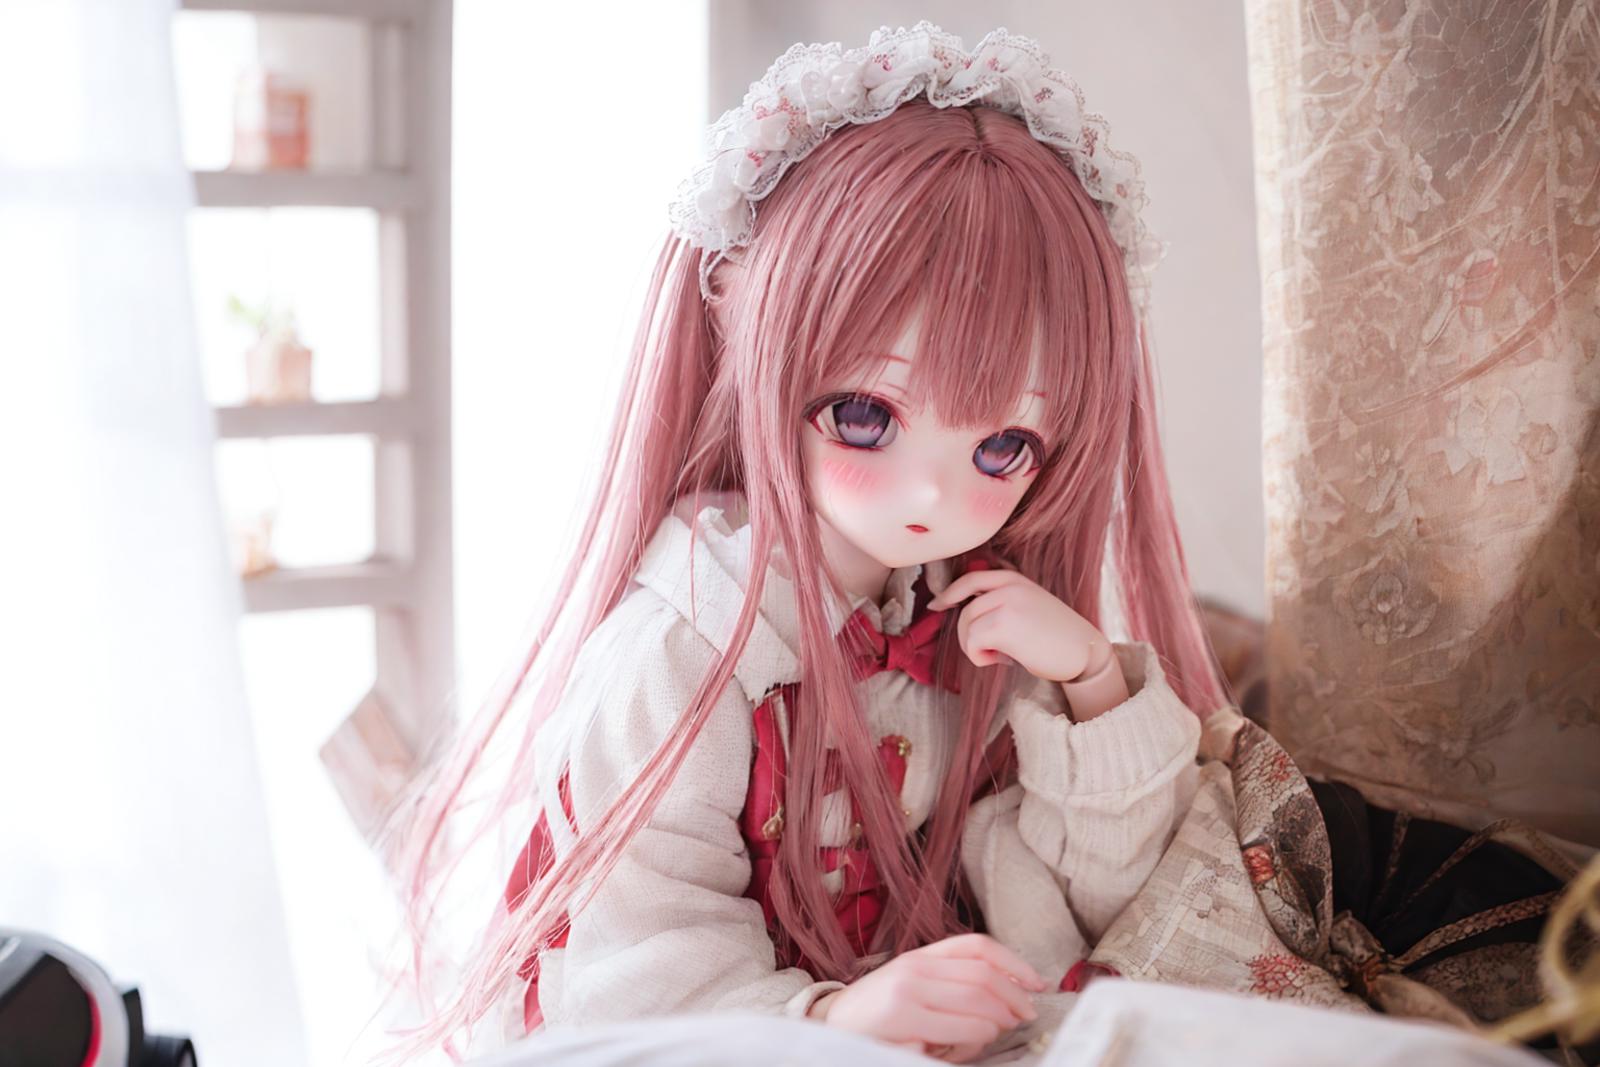 Doll style - Photography art - Realistic（joints doll,sd,mdd,dd,bjd,dds……）娃娃摄影艺术 image by Crown_0924